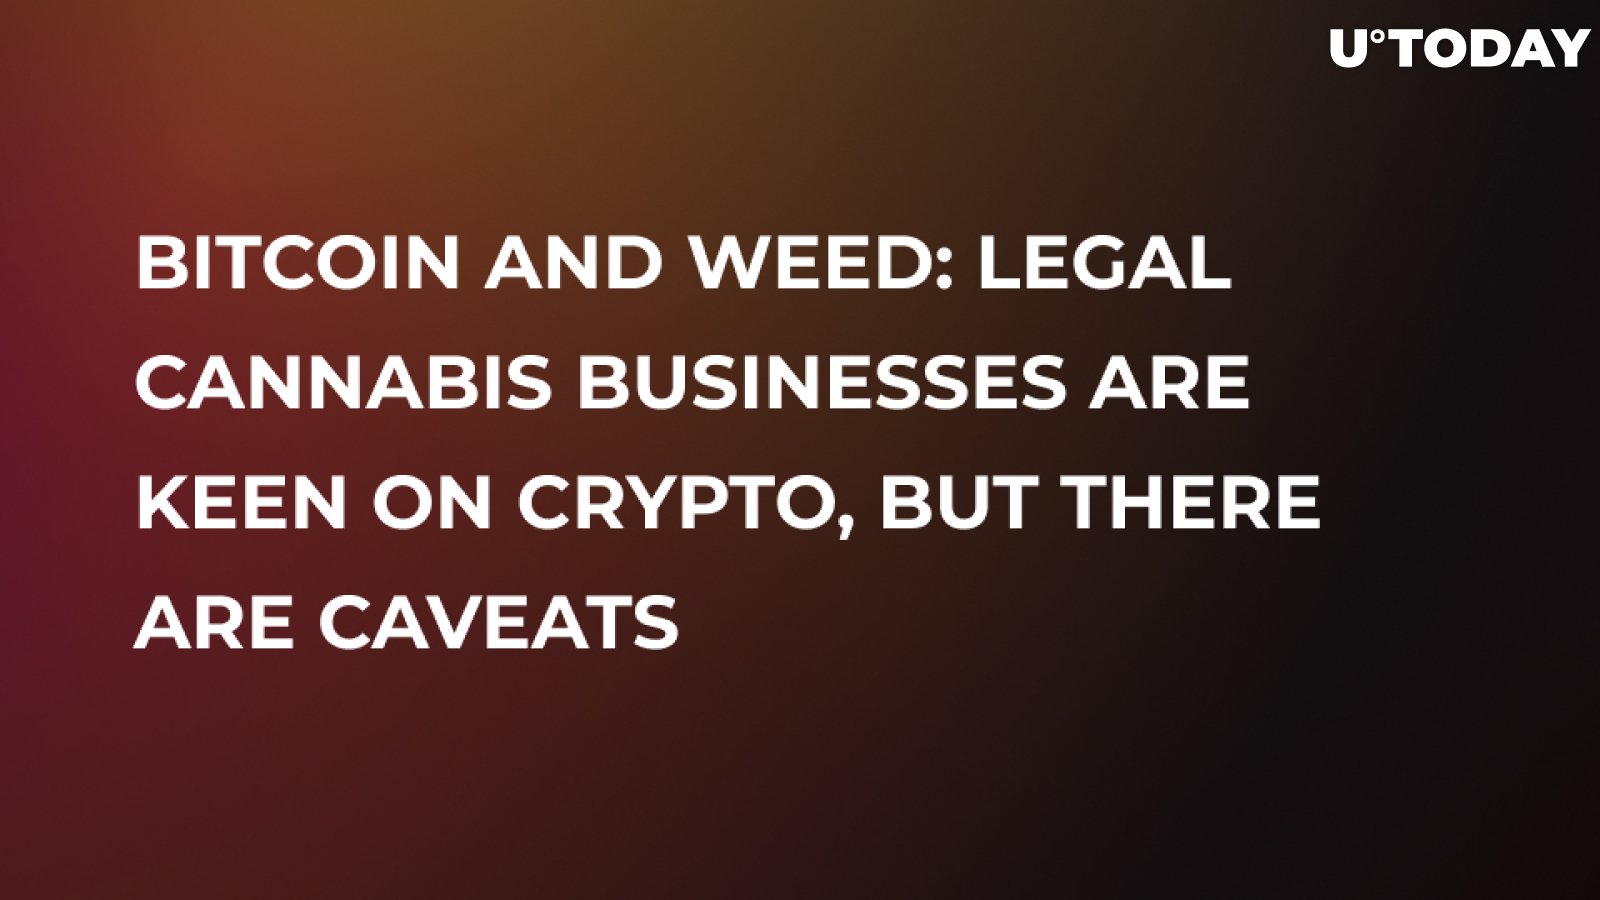 Bitcoin and Weed: Legal Cannabis Businesses Are Keen on Crypto, but There Are Caveats  